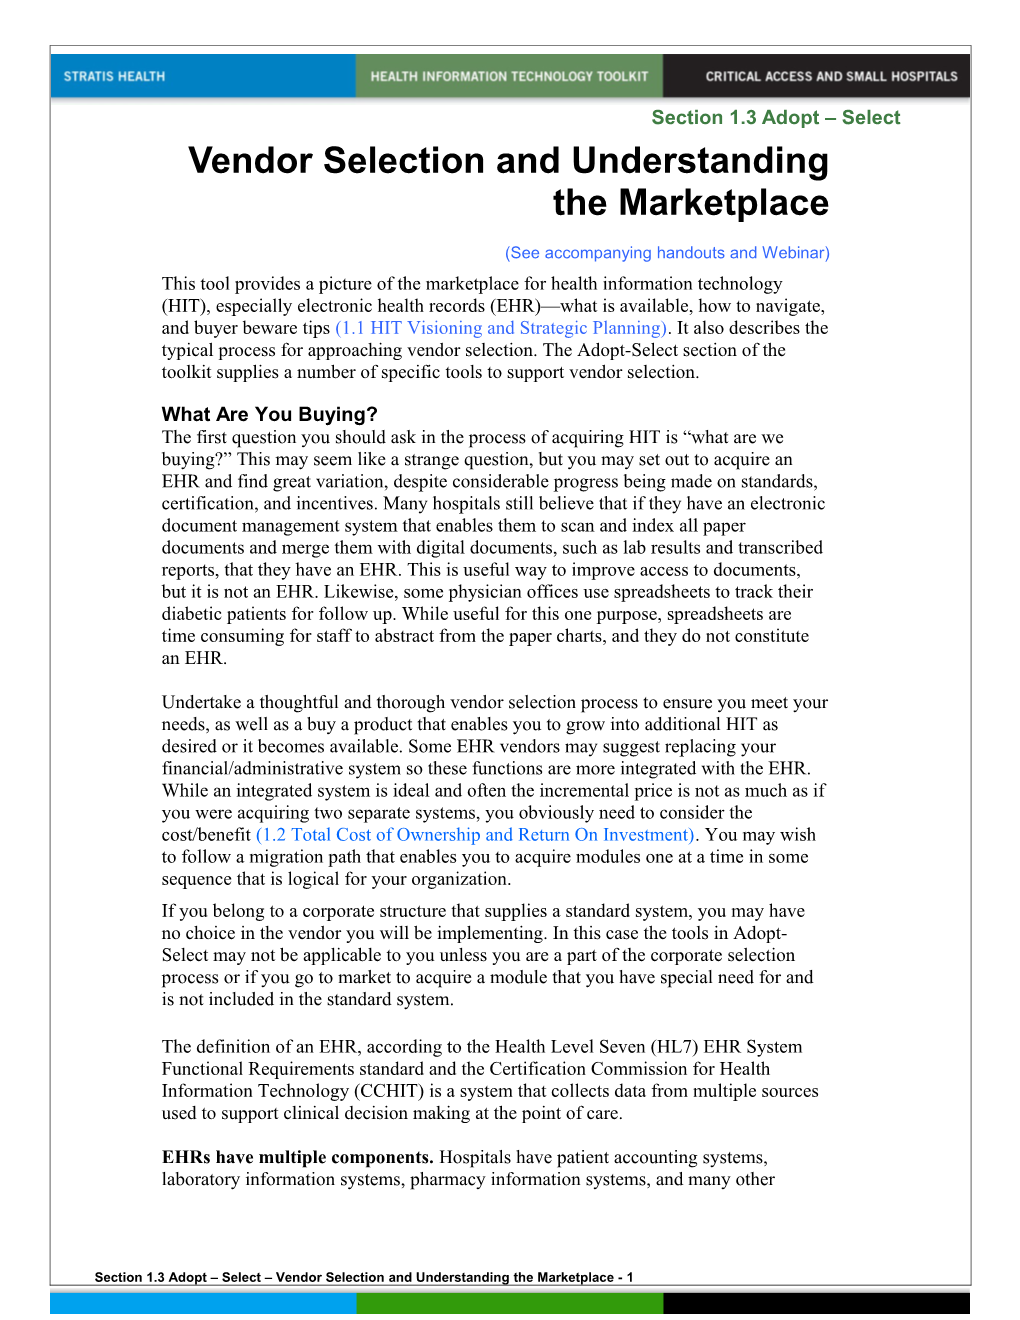 Vendor Selection and Understanding the Marketplace